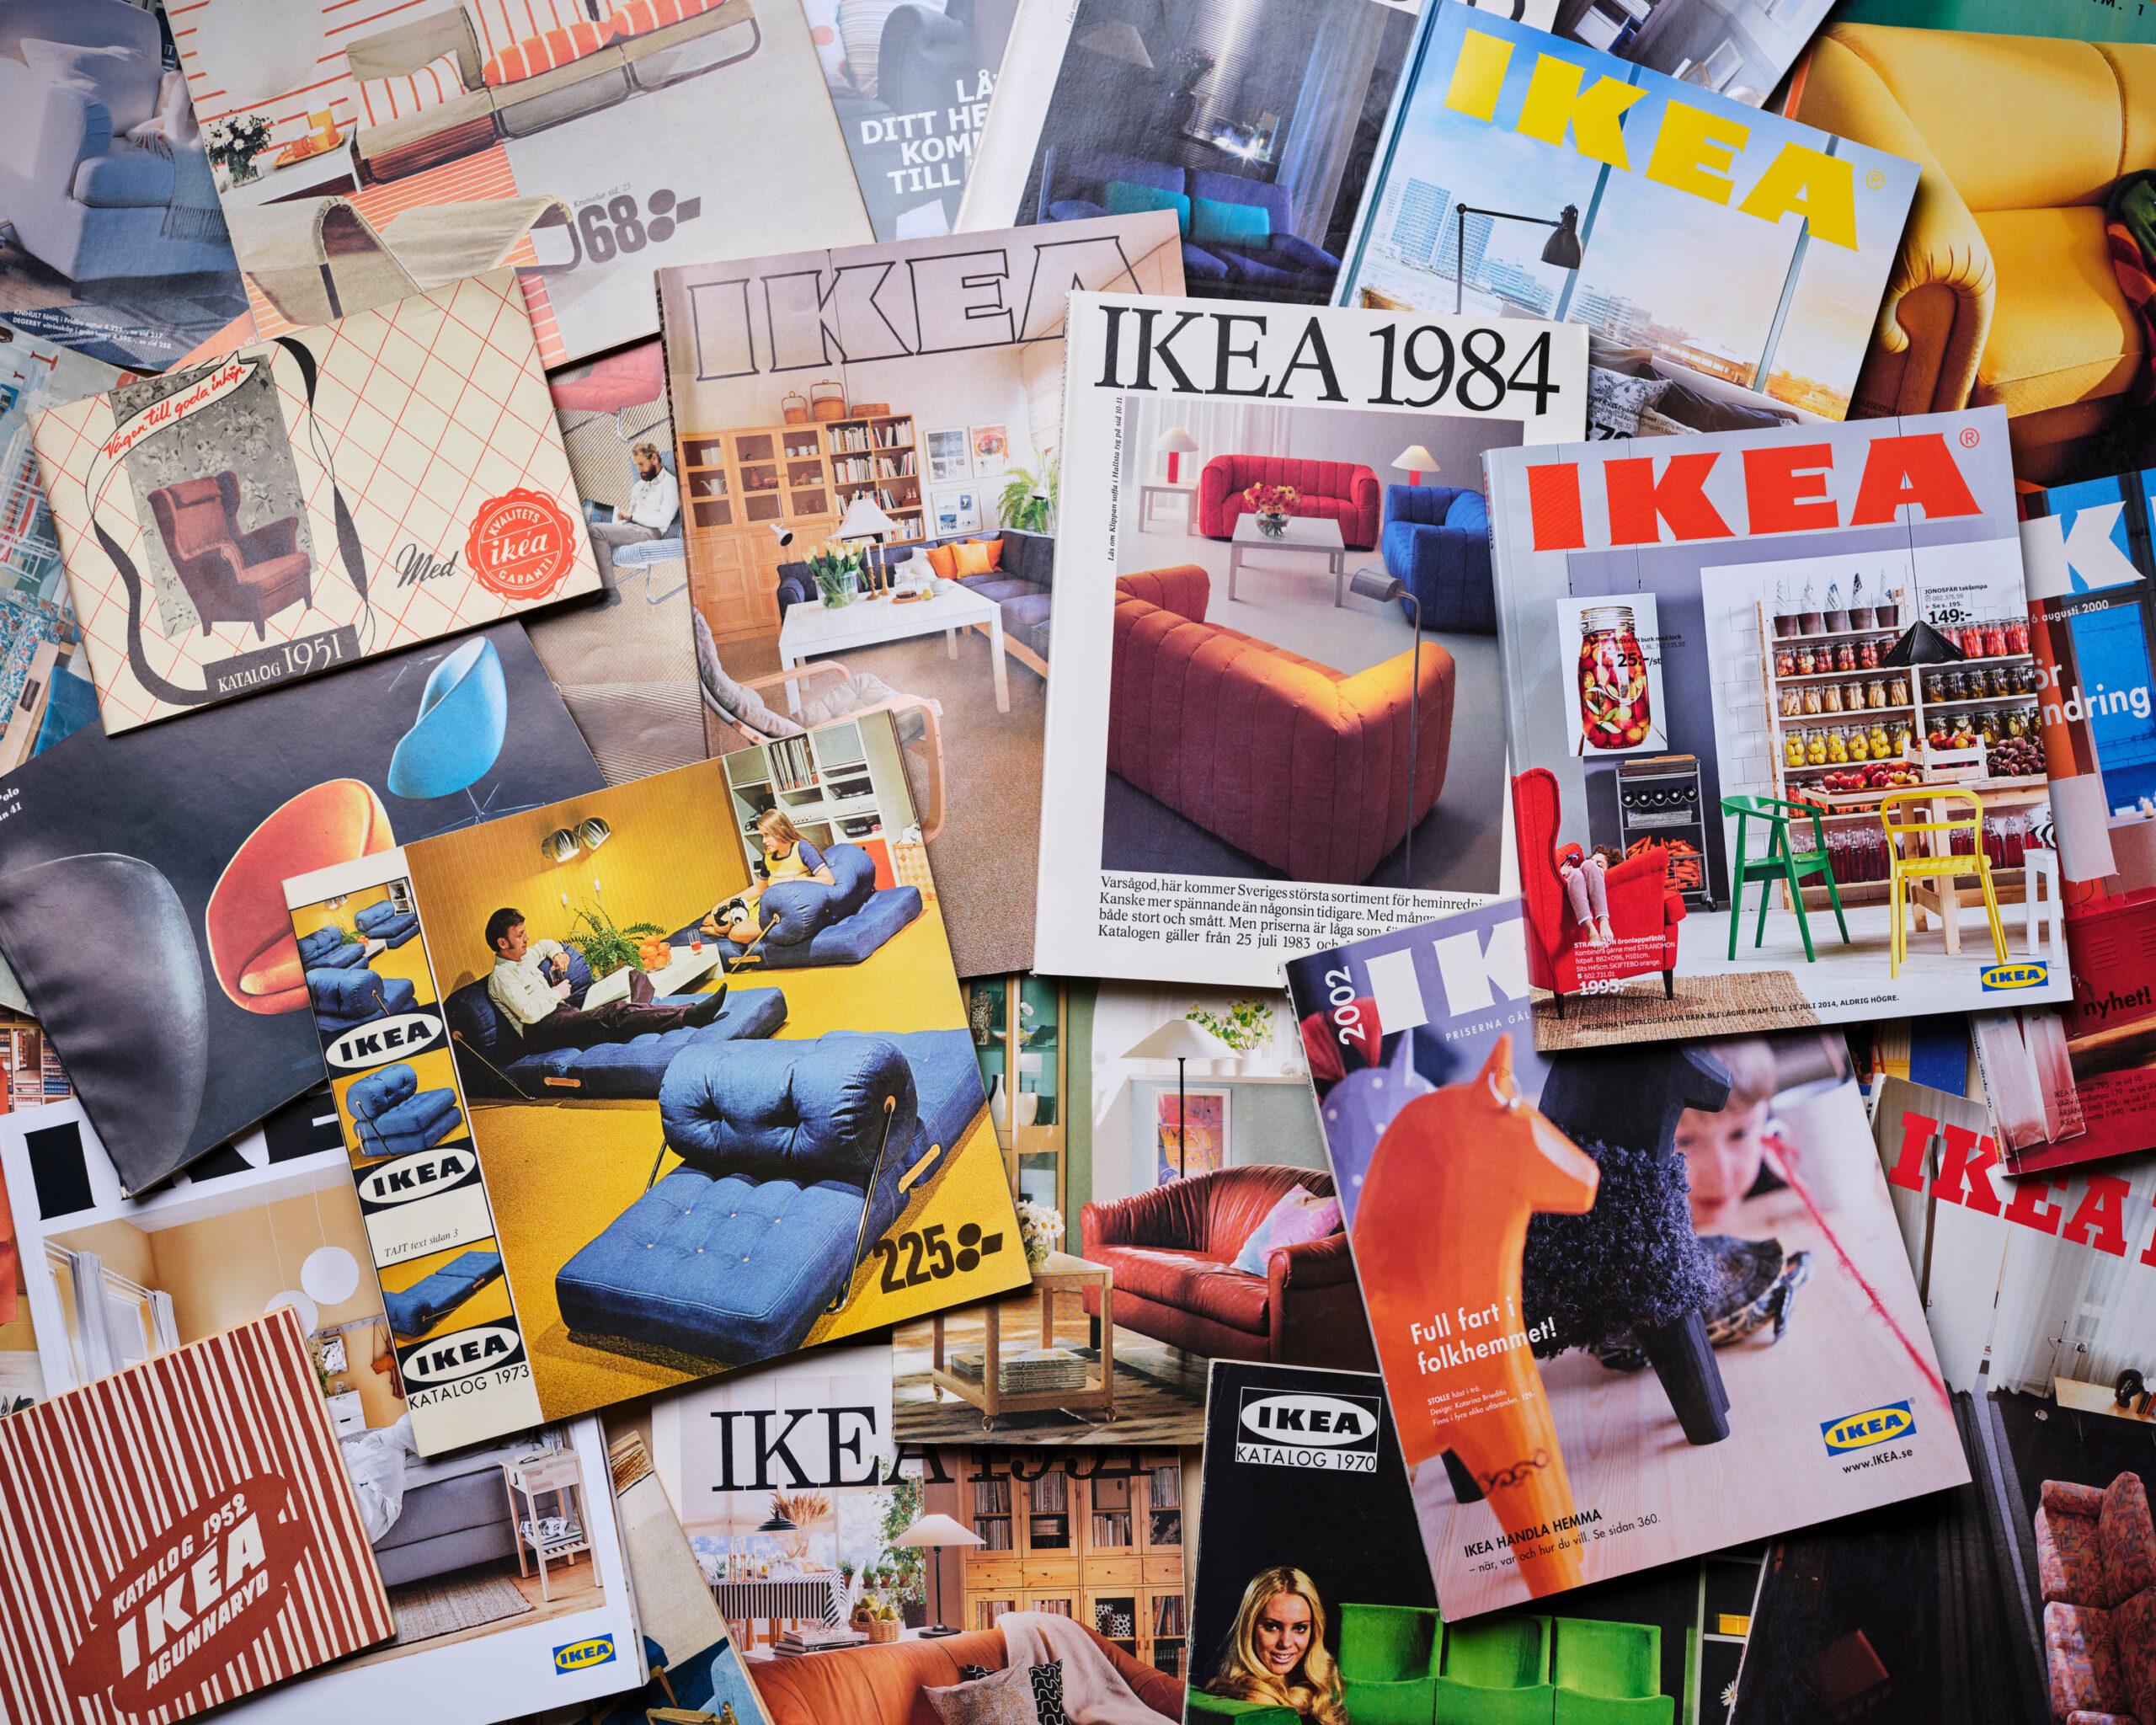 Many IKEA catalogues spread out.